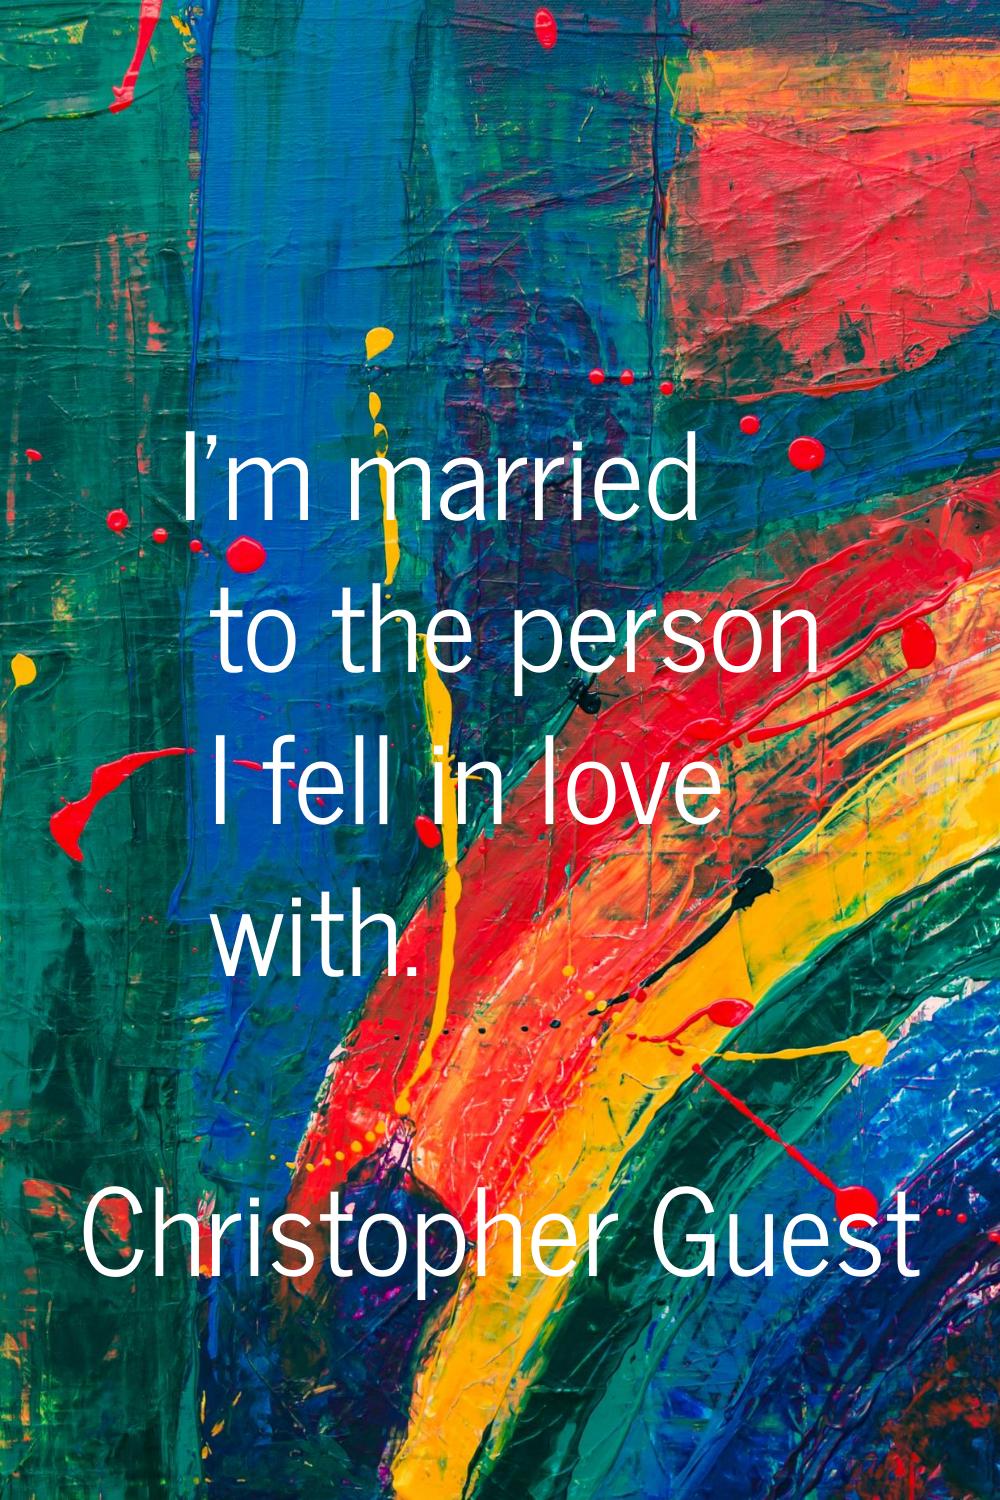 I'm married to the person I fell in love with.